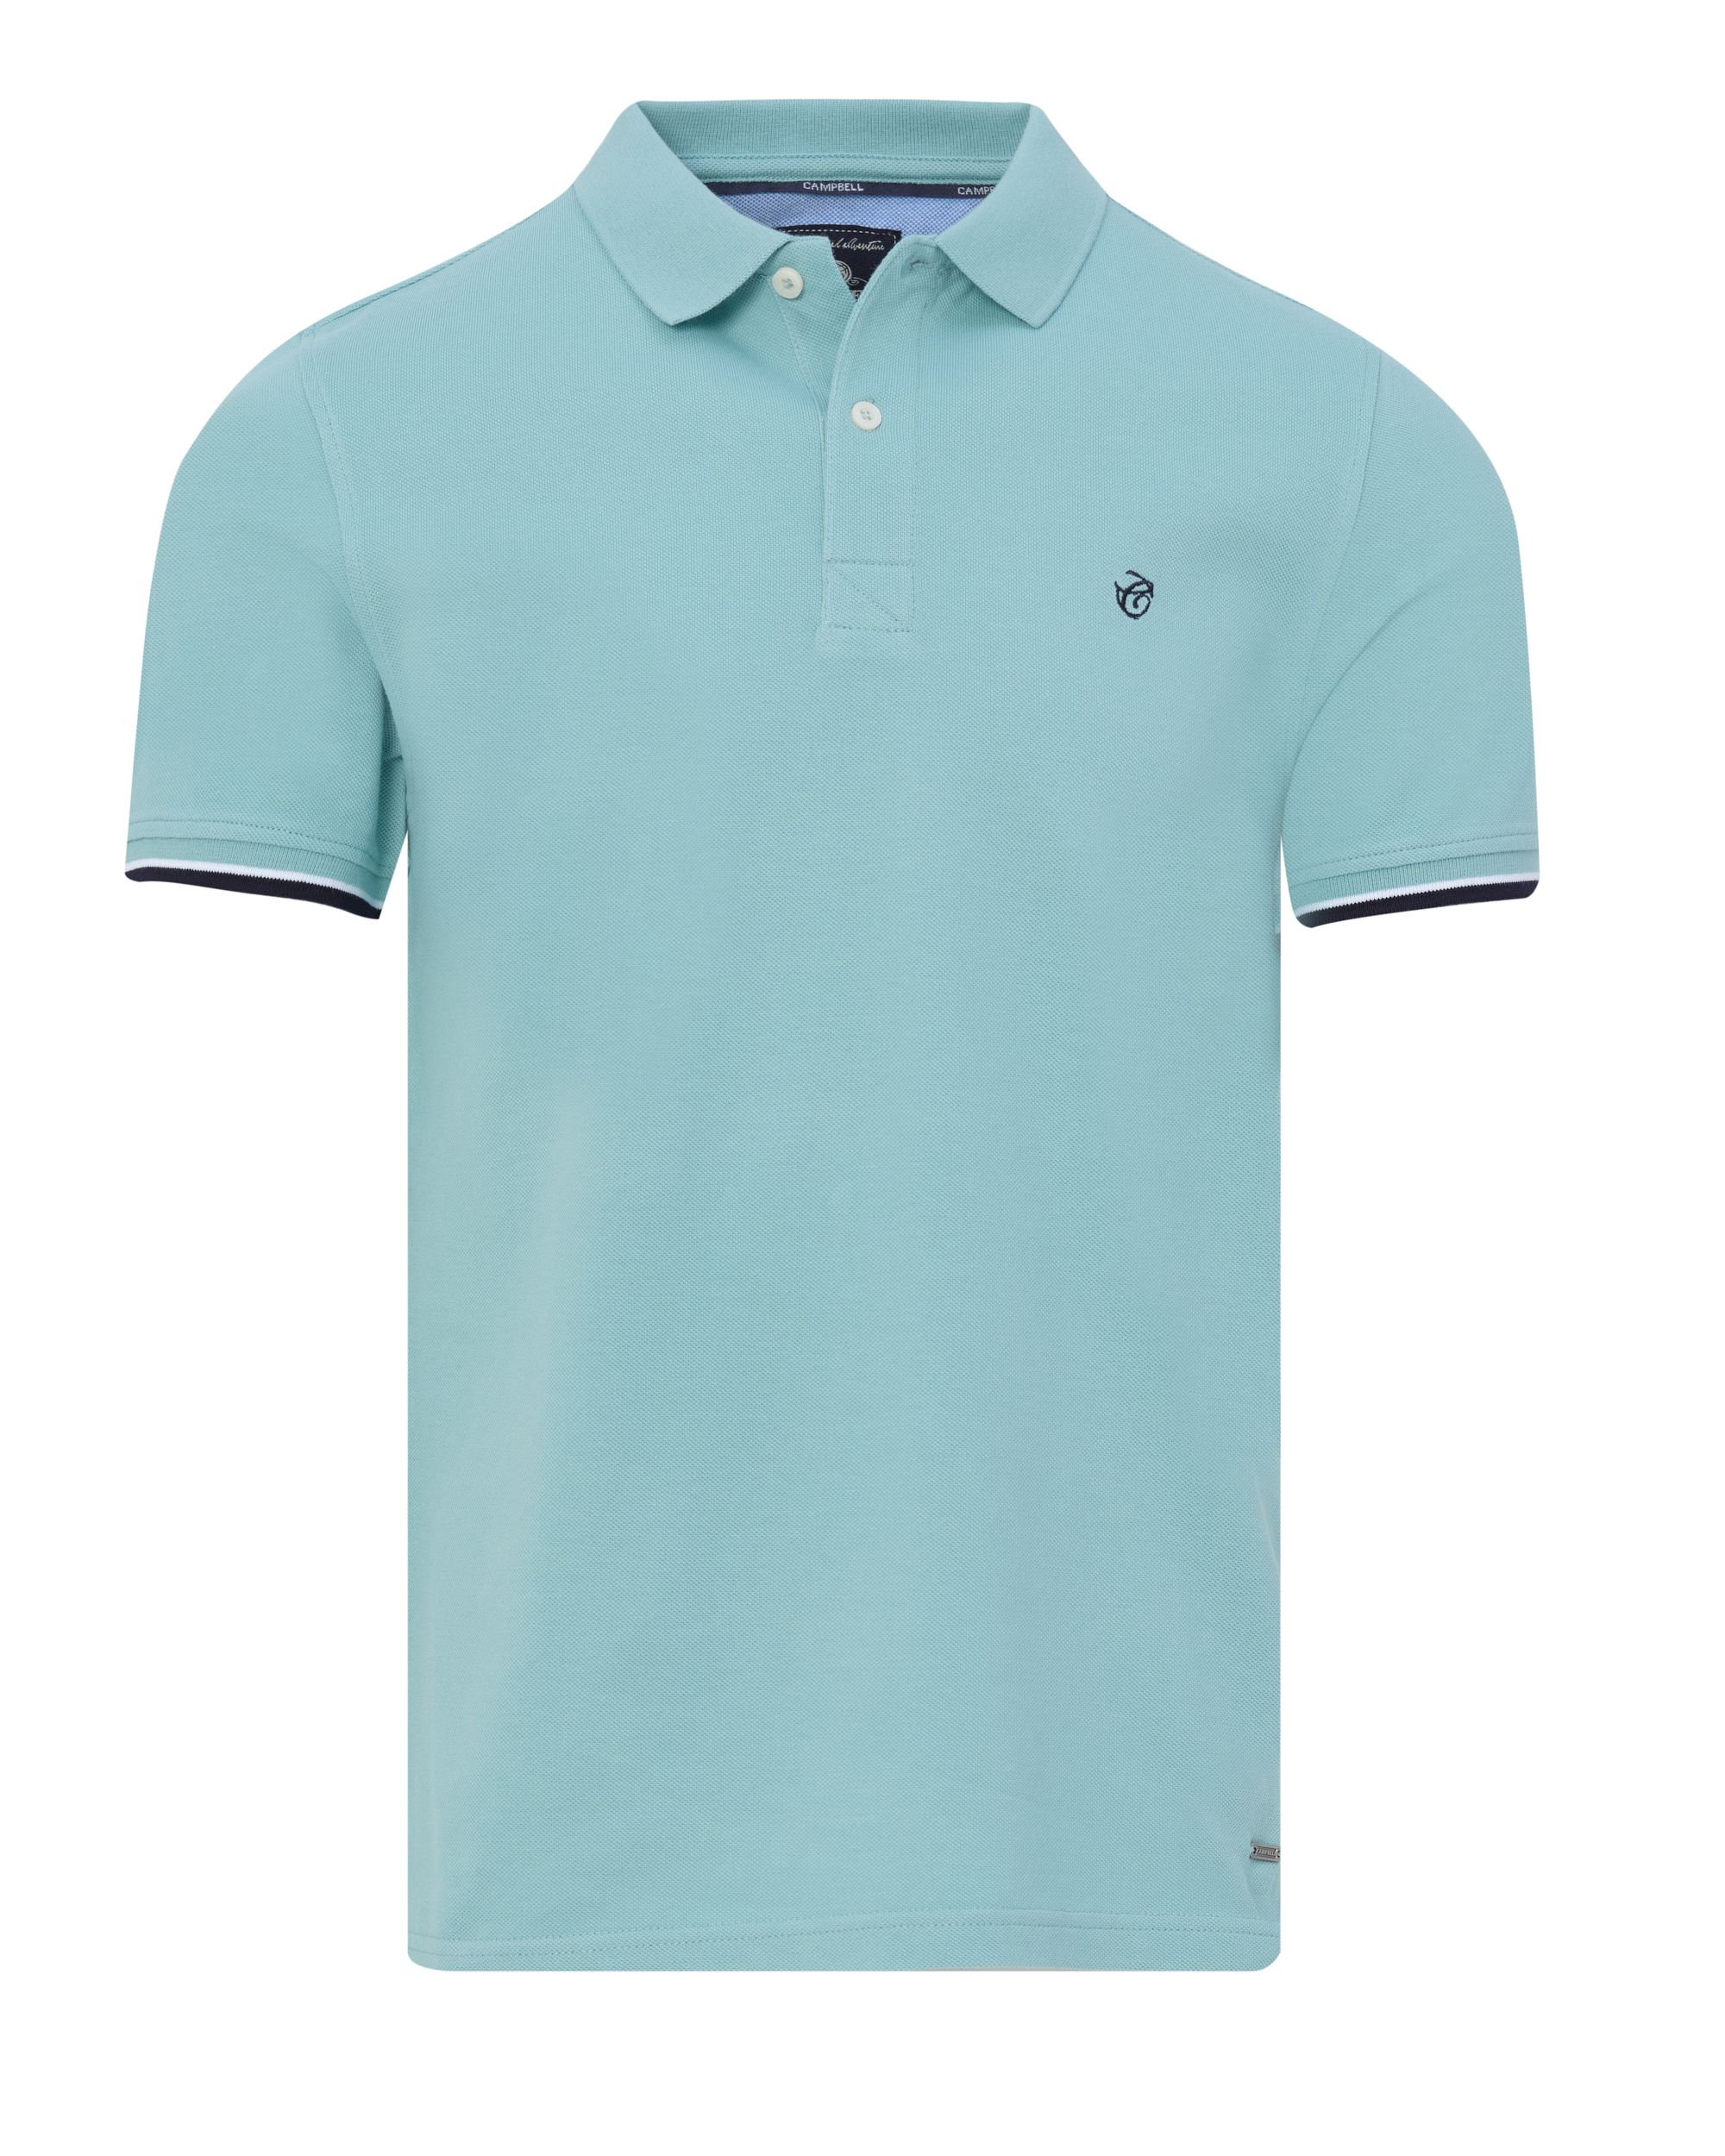 Campbell Classic Leicester Polo KM Aquifer 084379-014-L